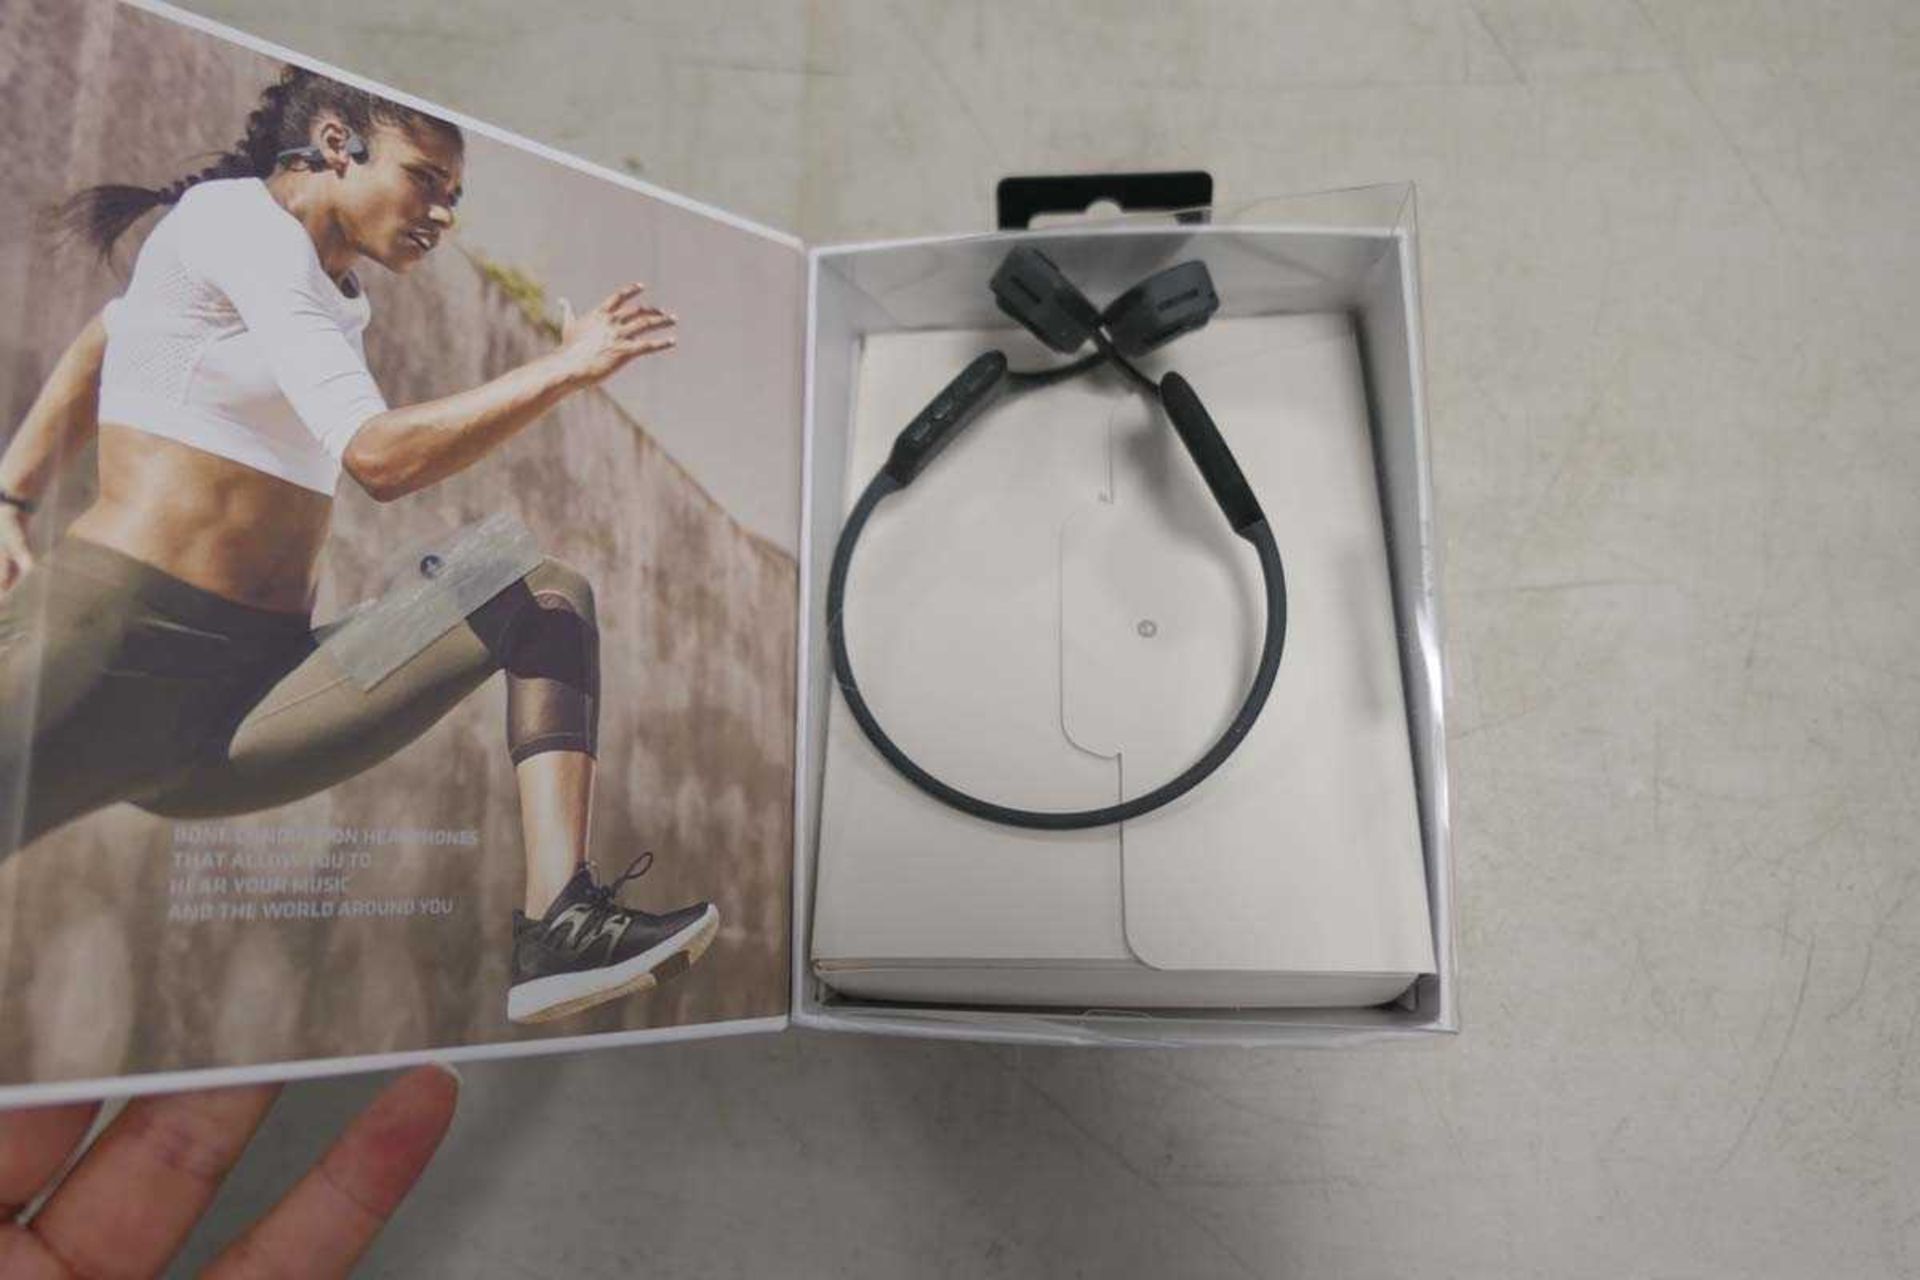 +VAT Aftershokz Air bone conduction headset in box - Image 2 of 2